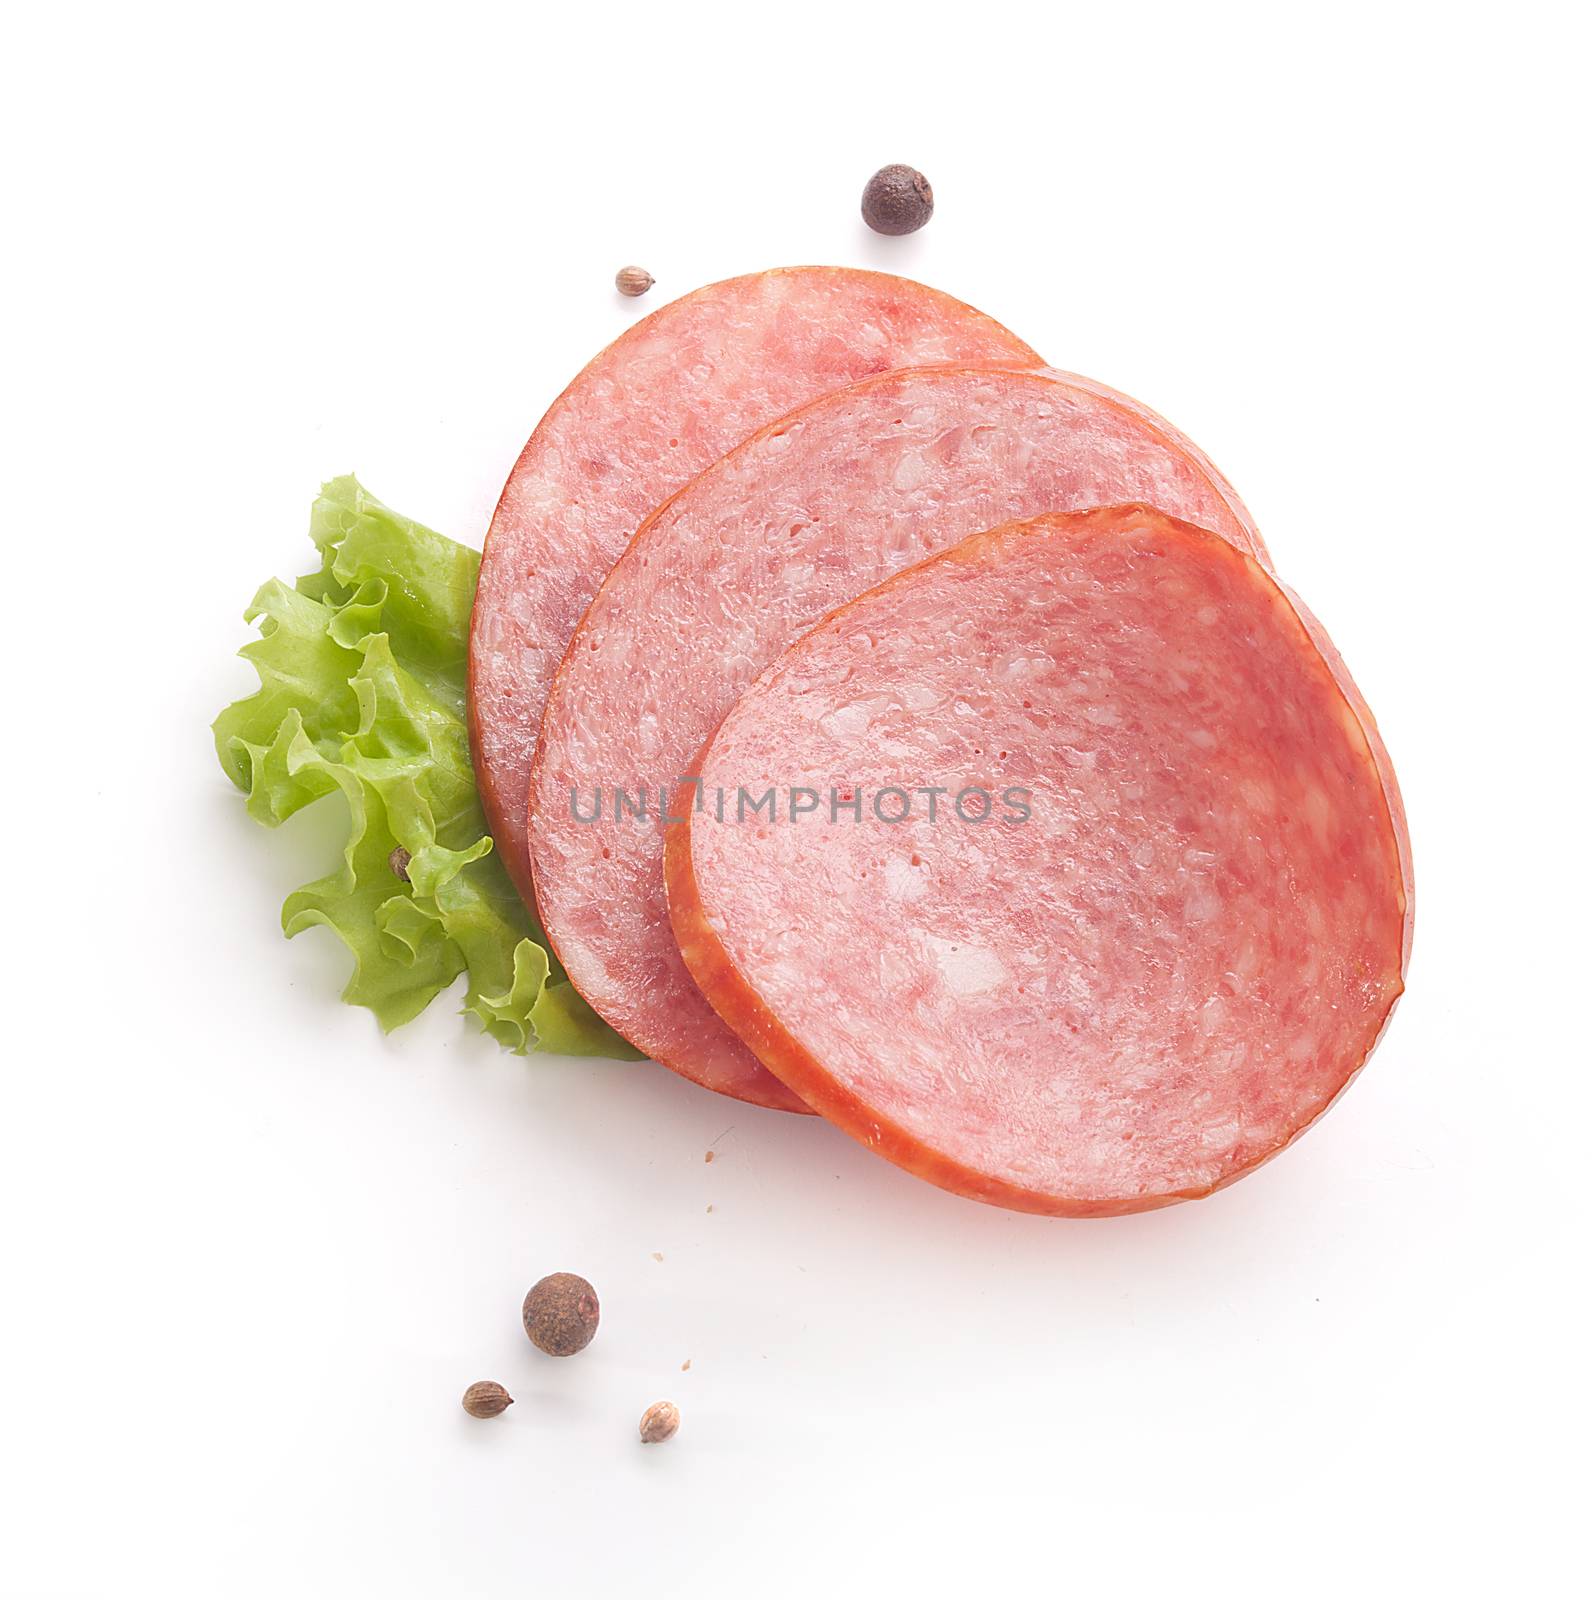 Three pieces pf smoked sausage with fresh green lettuce and black pepper on the white